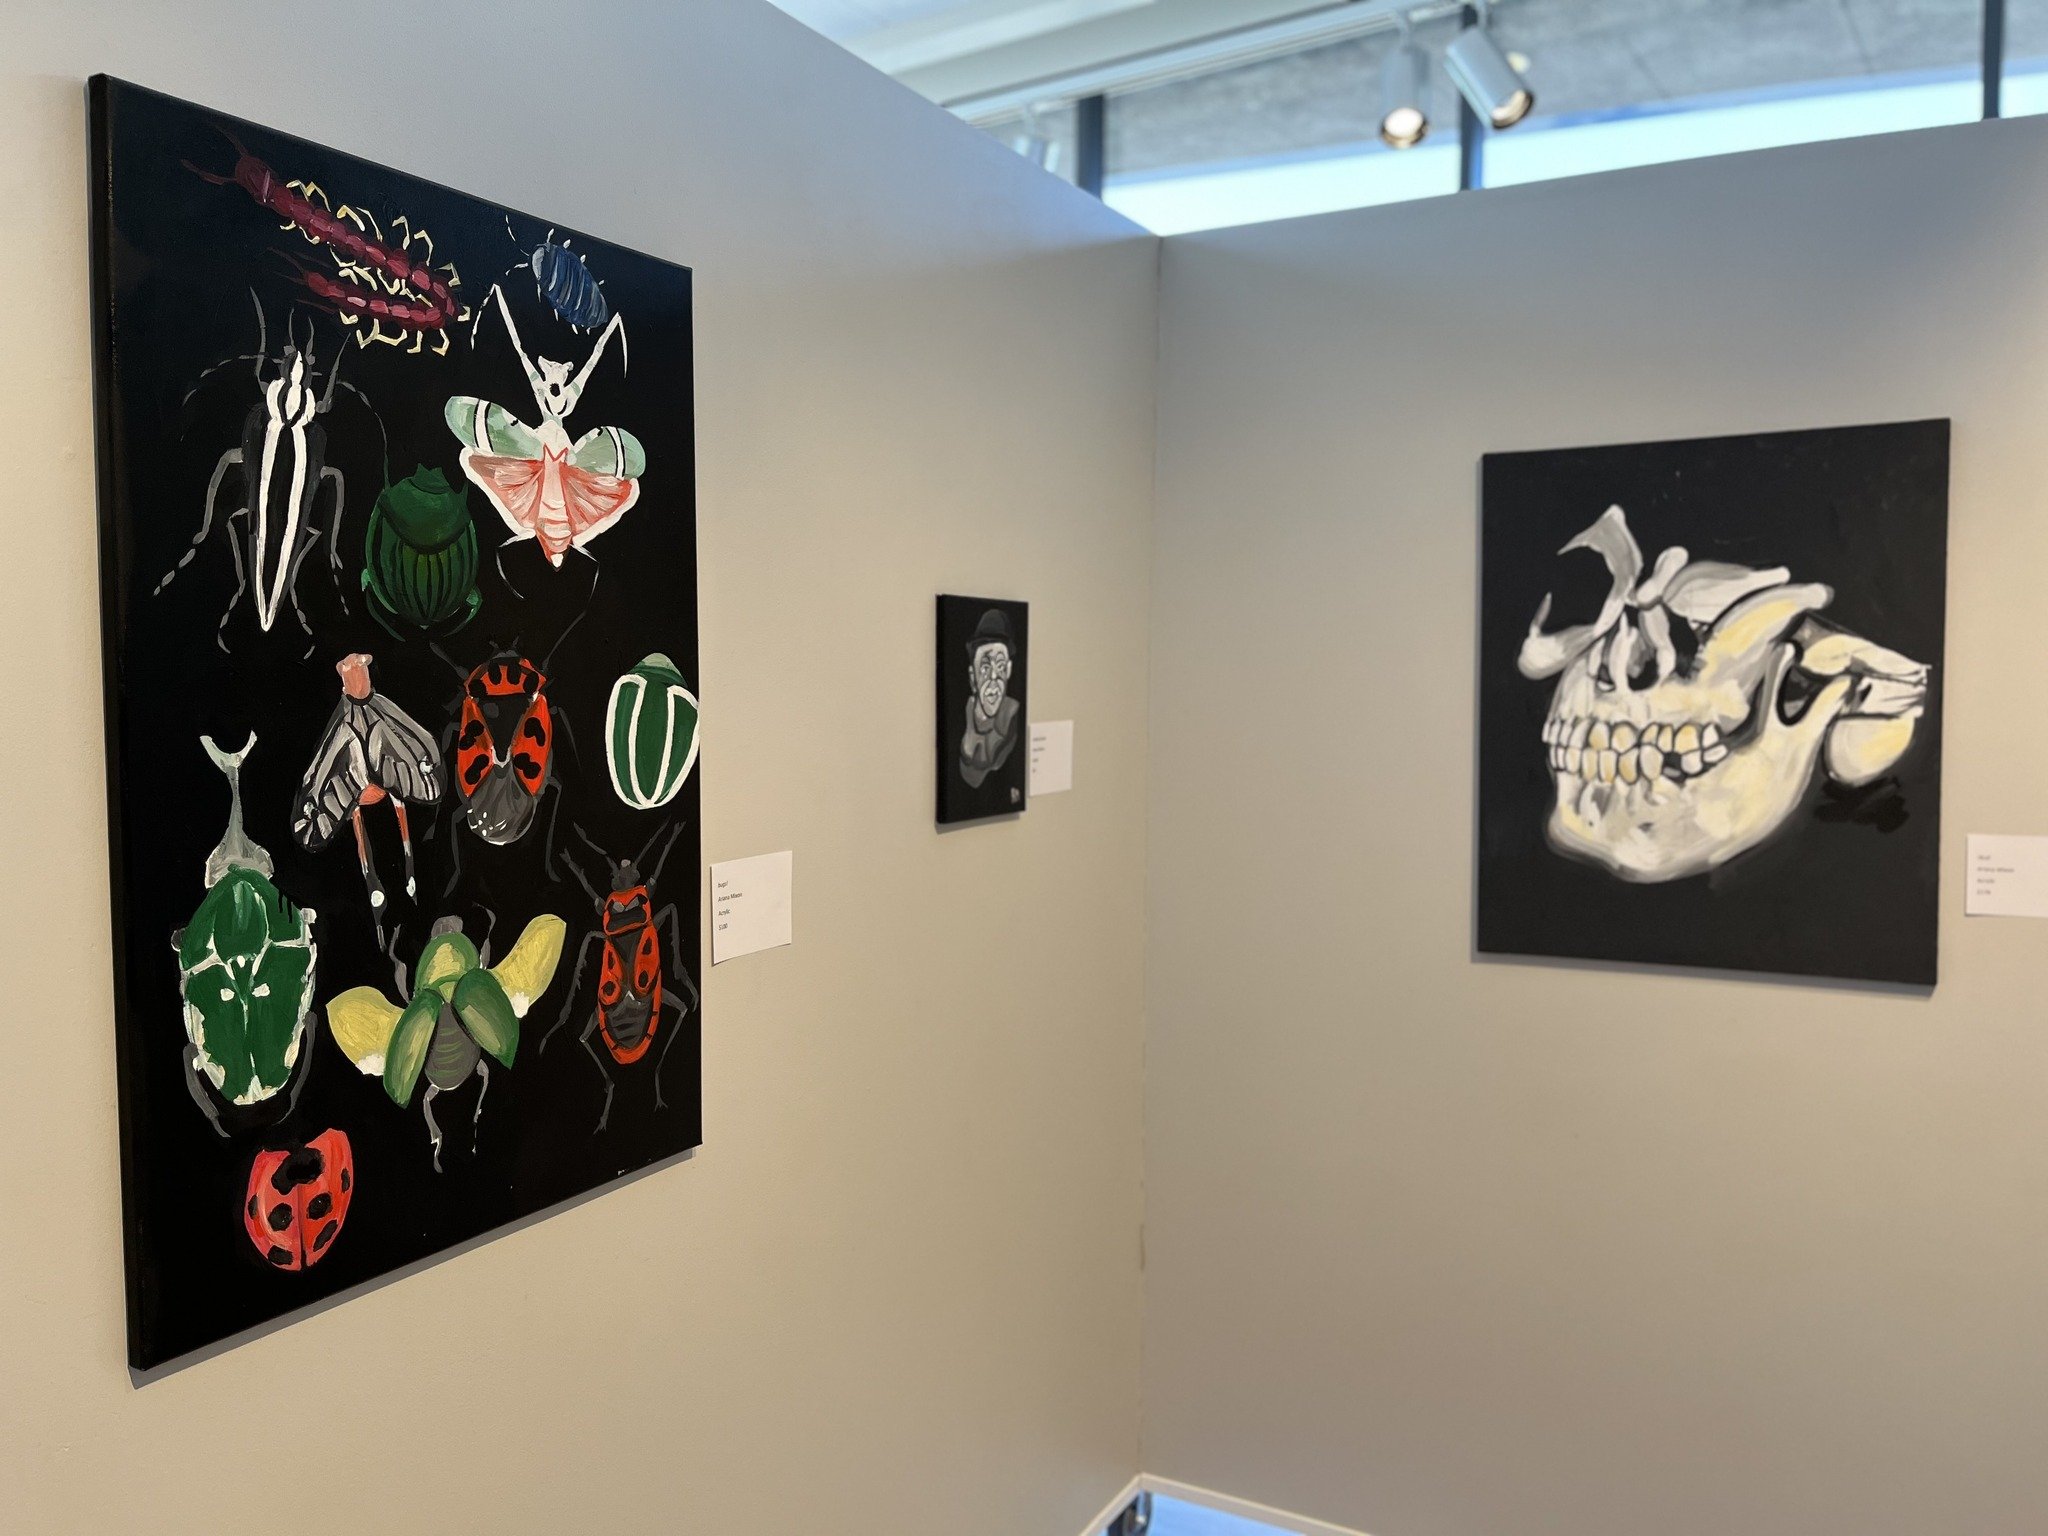 There is a week left to come and see the artwork of local artist Ariana Mixon, currently on display in our Front Gallery.

Ariana is an ambitious and driven individual, especially when it comes to her artistic pursuits. She was in the I.B. Visual Art